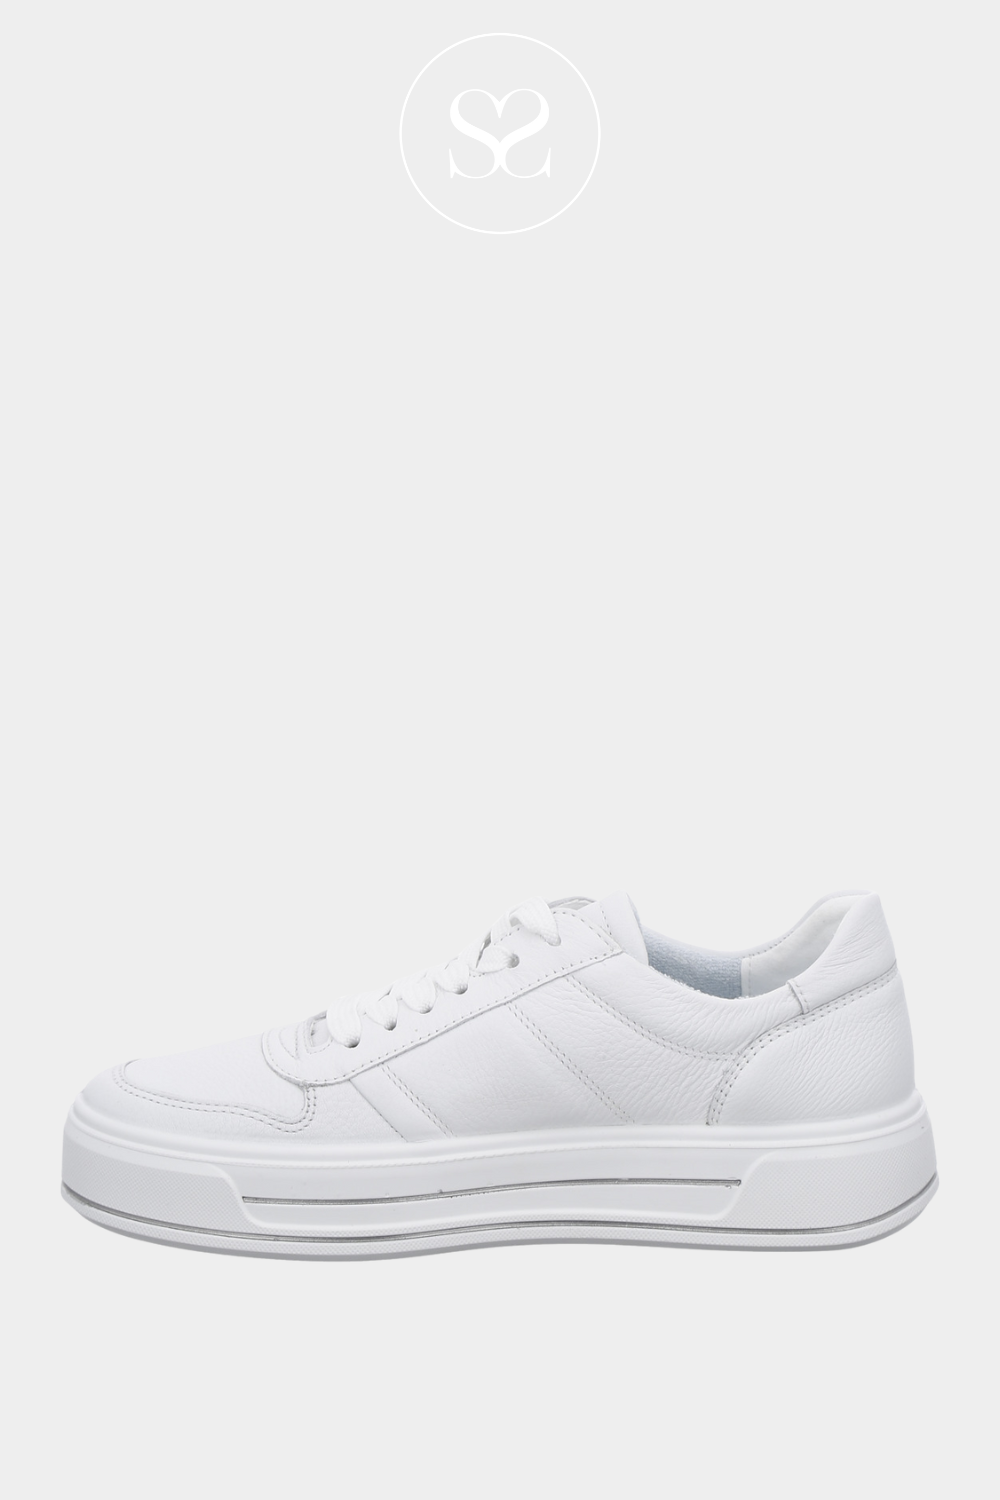 ARA 12-23001-04 WHITE LEATHER FLATFORM TRAINERS WITH LACES AND WHITE PANELLING